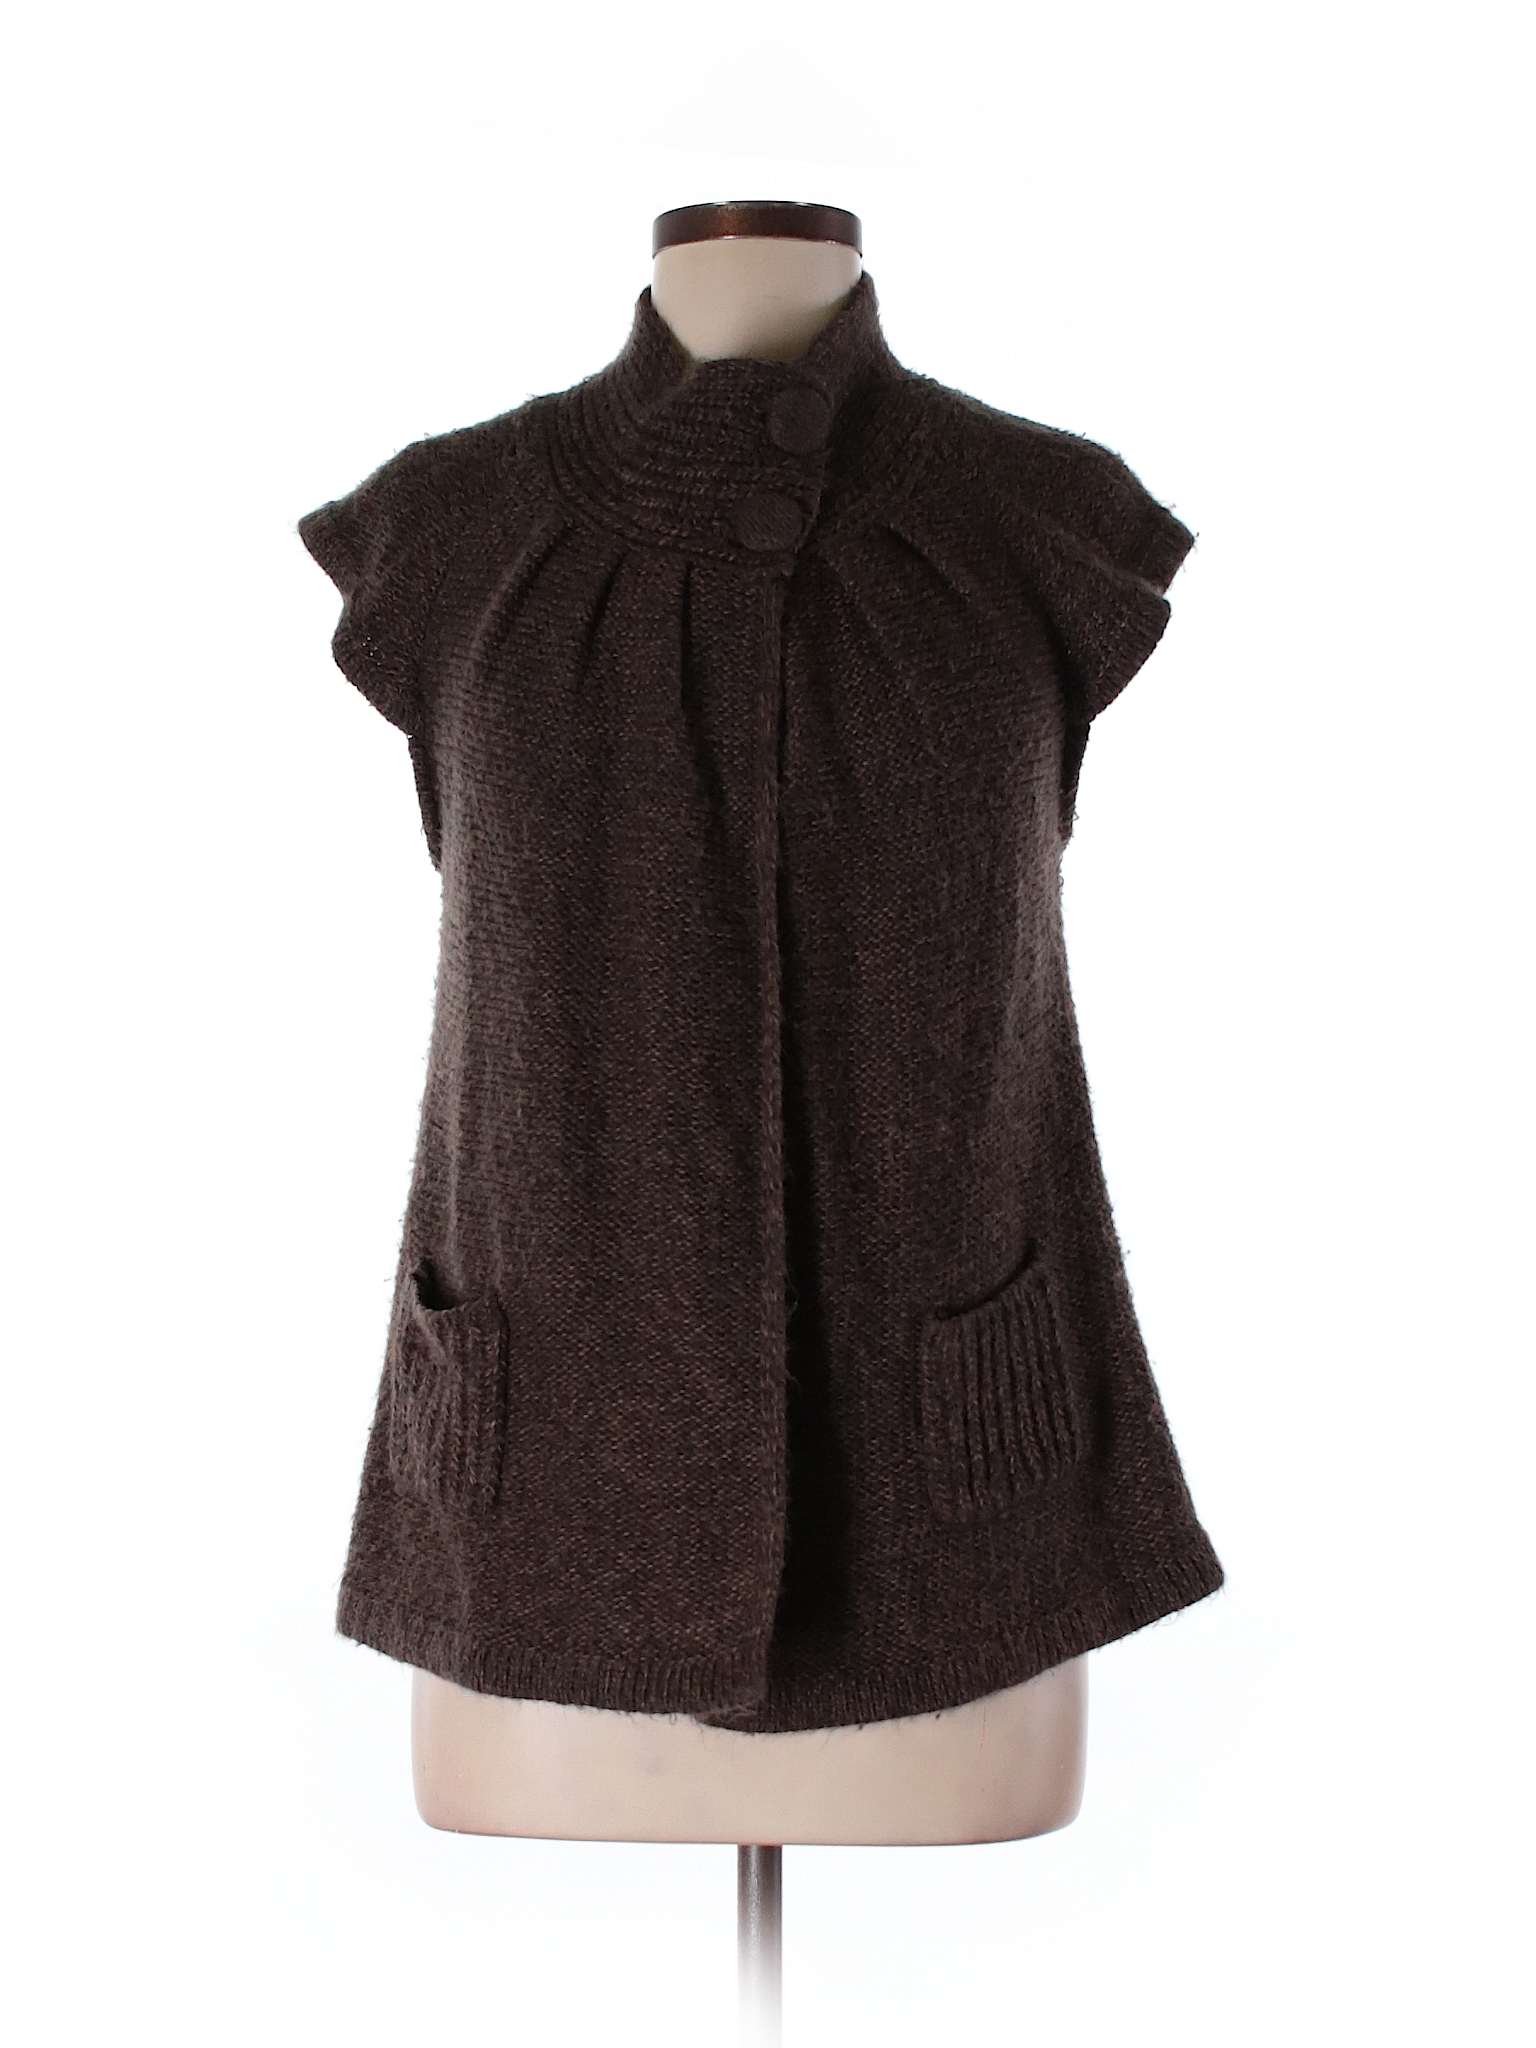 New Directions 100% Cotton Solid Brown Cardigan Size M - 95% off | thredUP